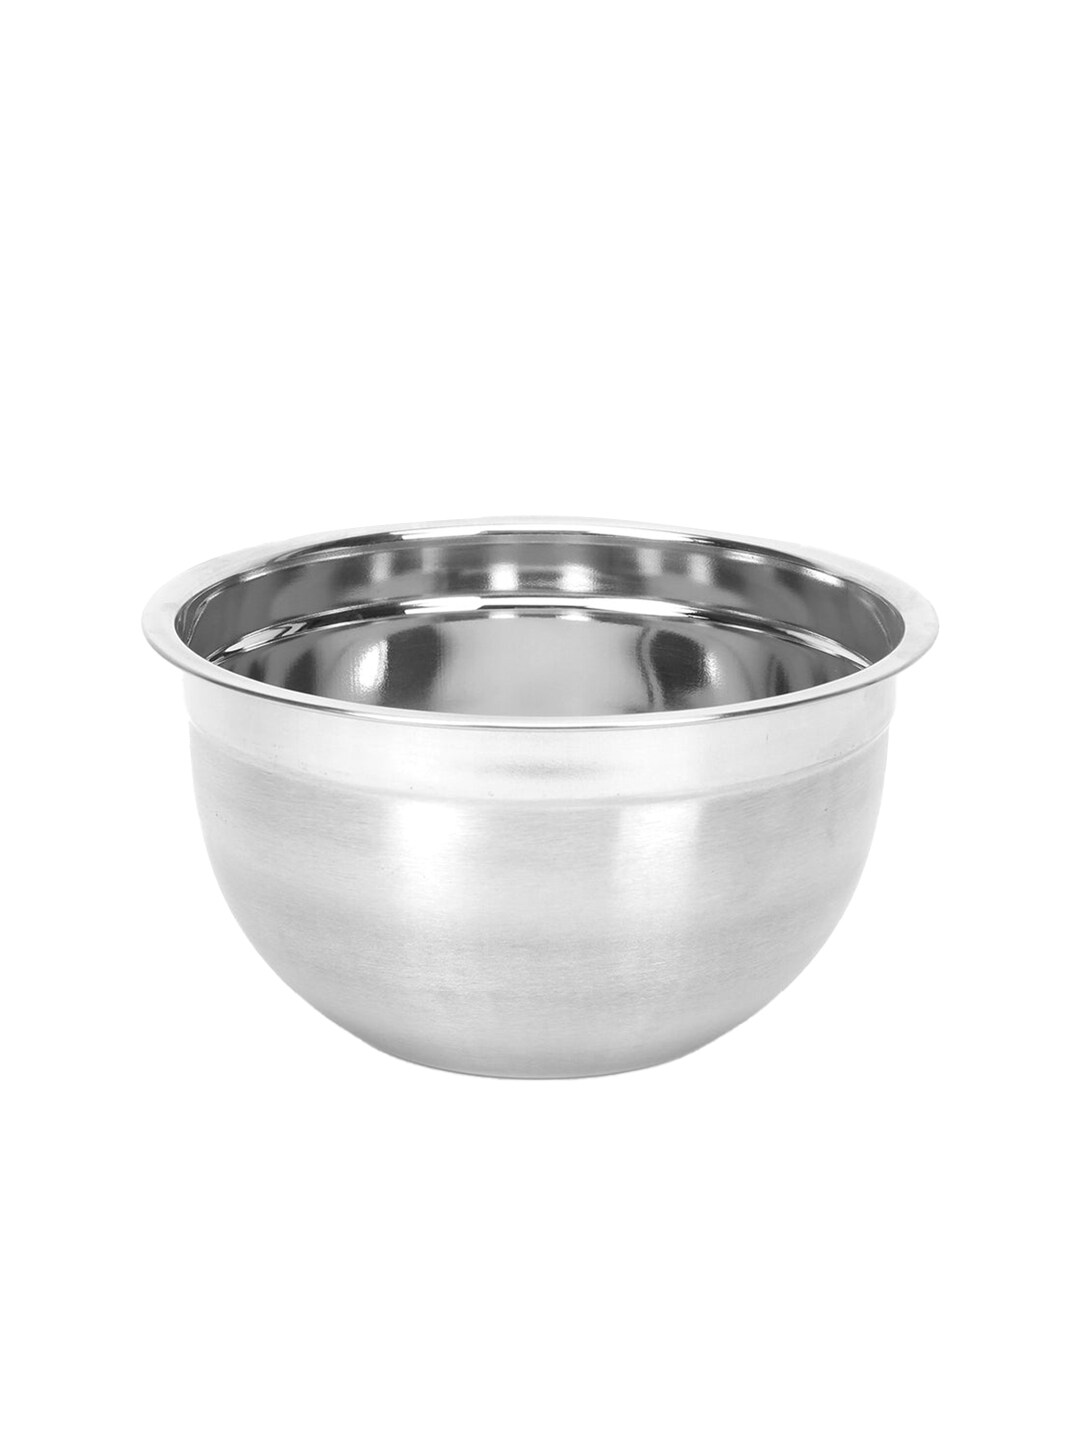 Athome by Nilkamal Silver Mixing Bowl Price in India